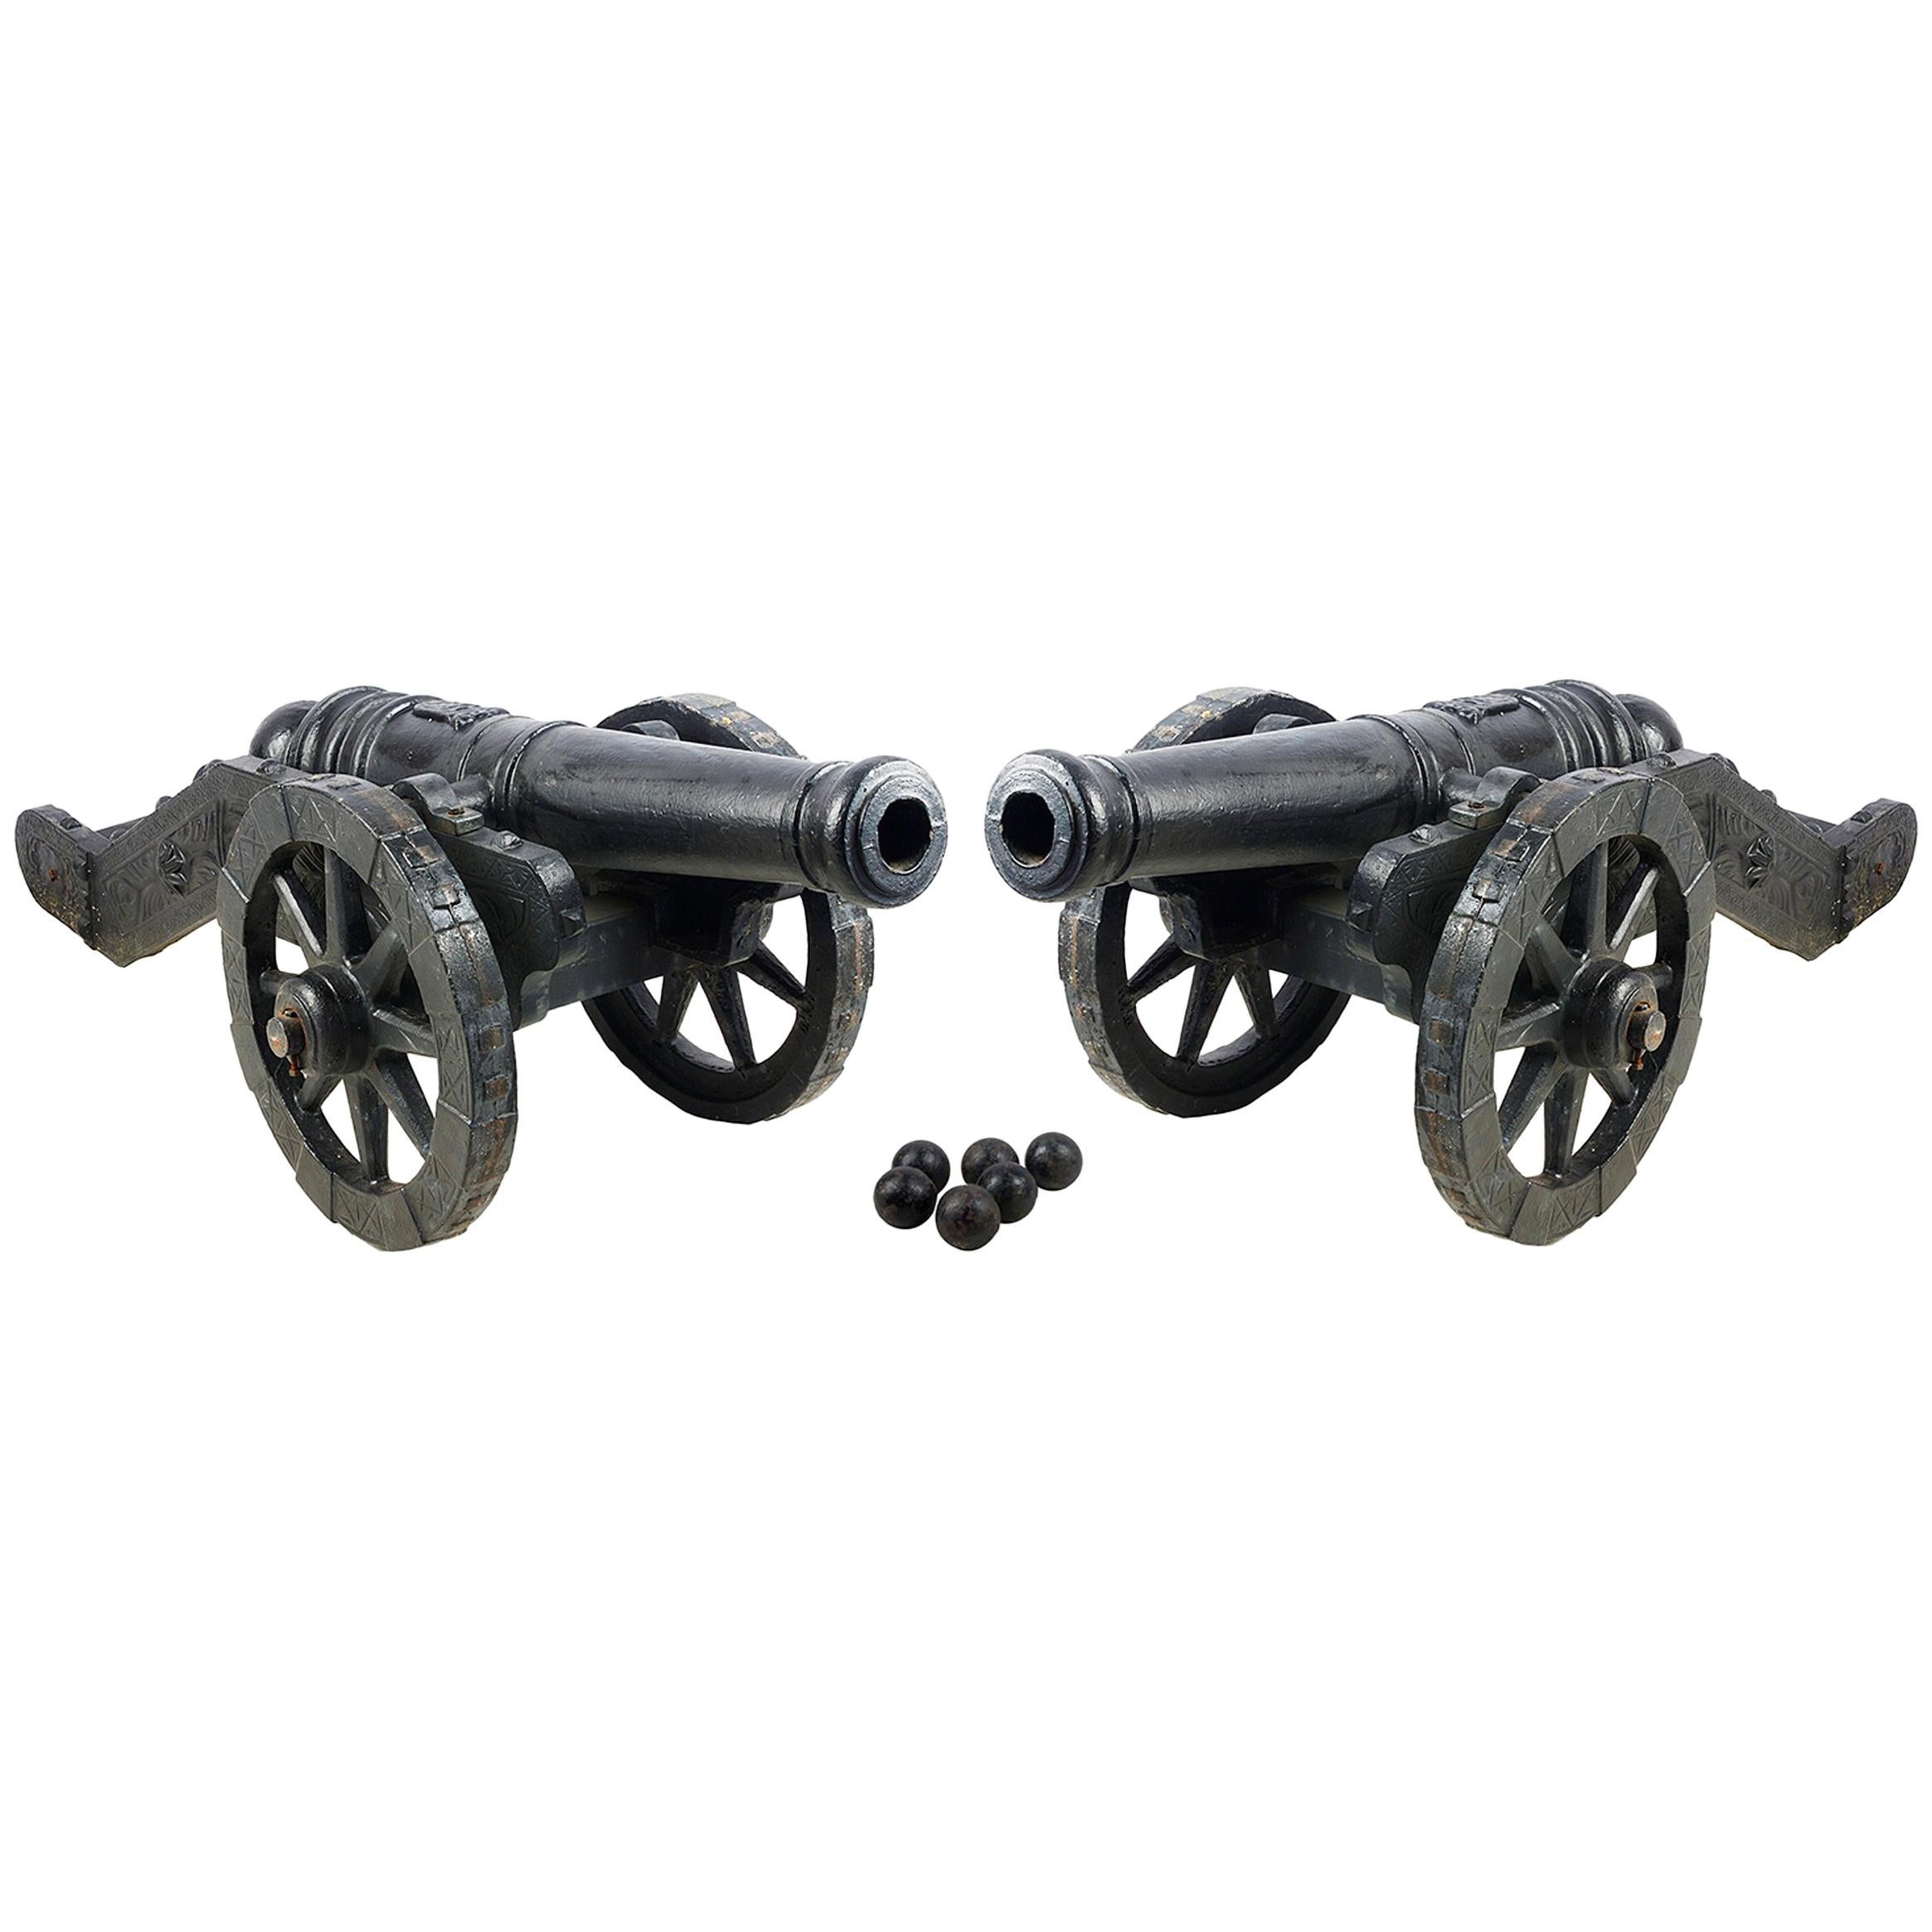 Pair of Early 20th Century Replica Cast Iron Cannons